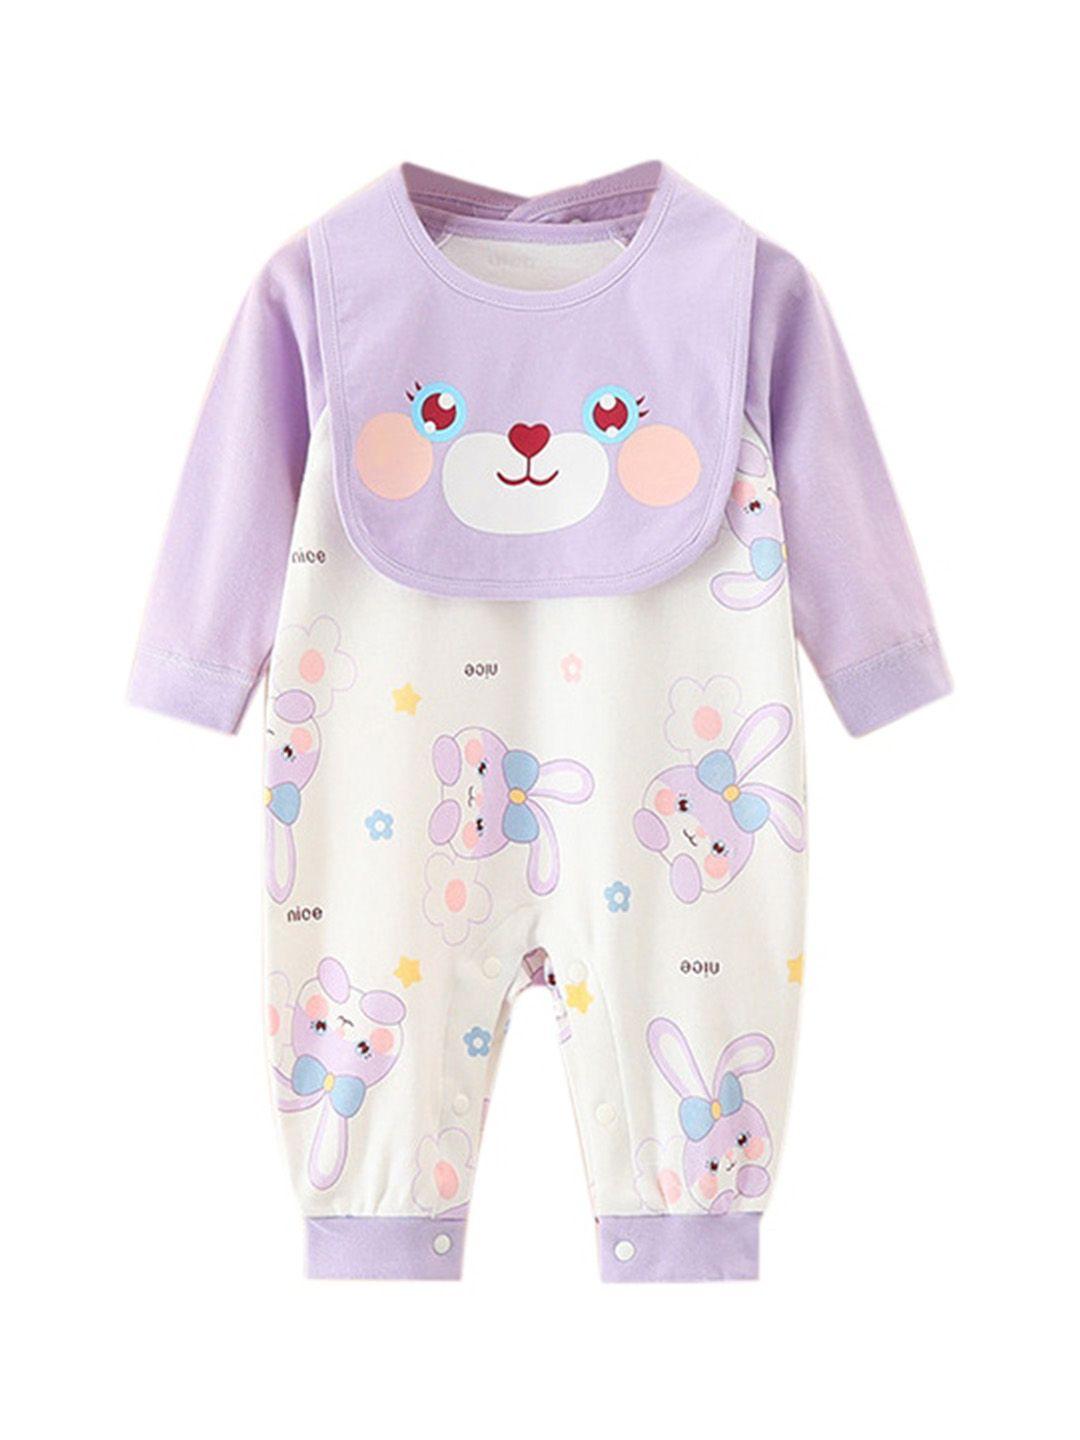 stylecast purple & white infant girls printed cotton rompers